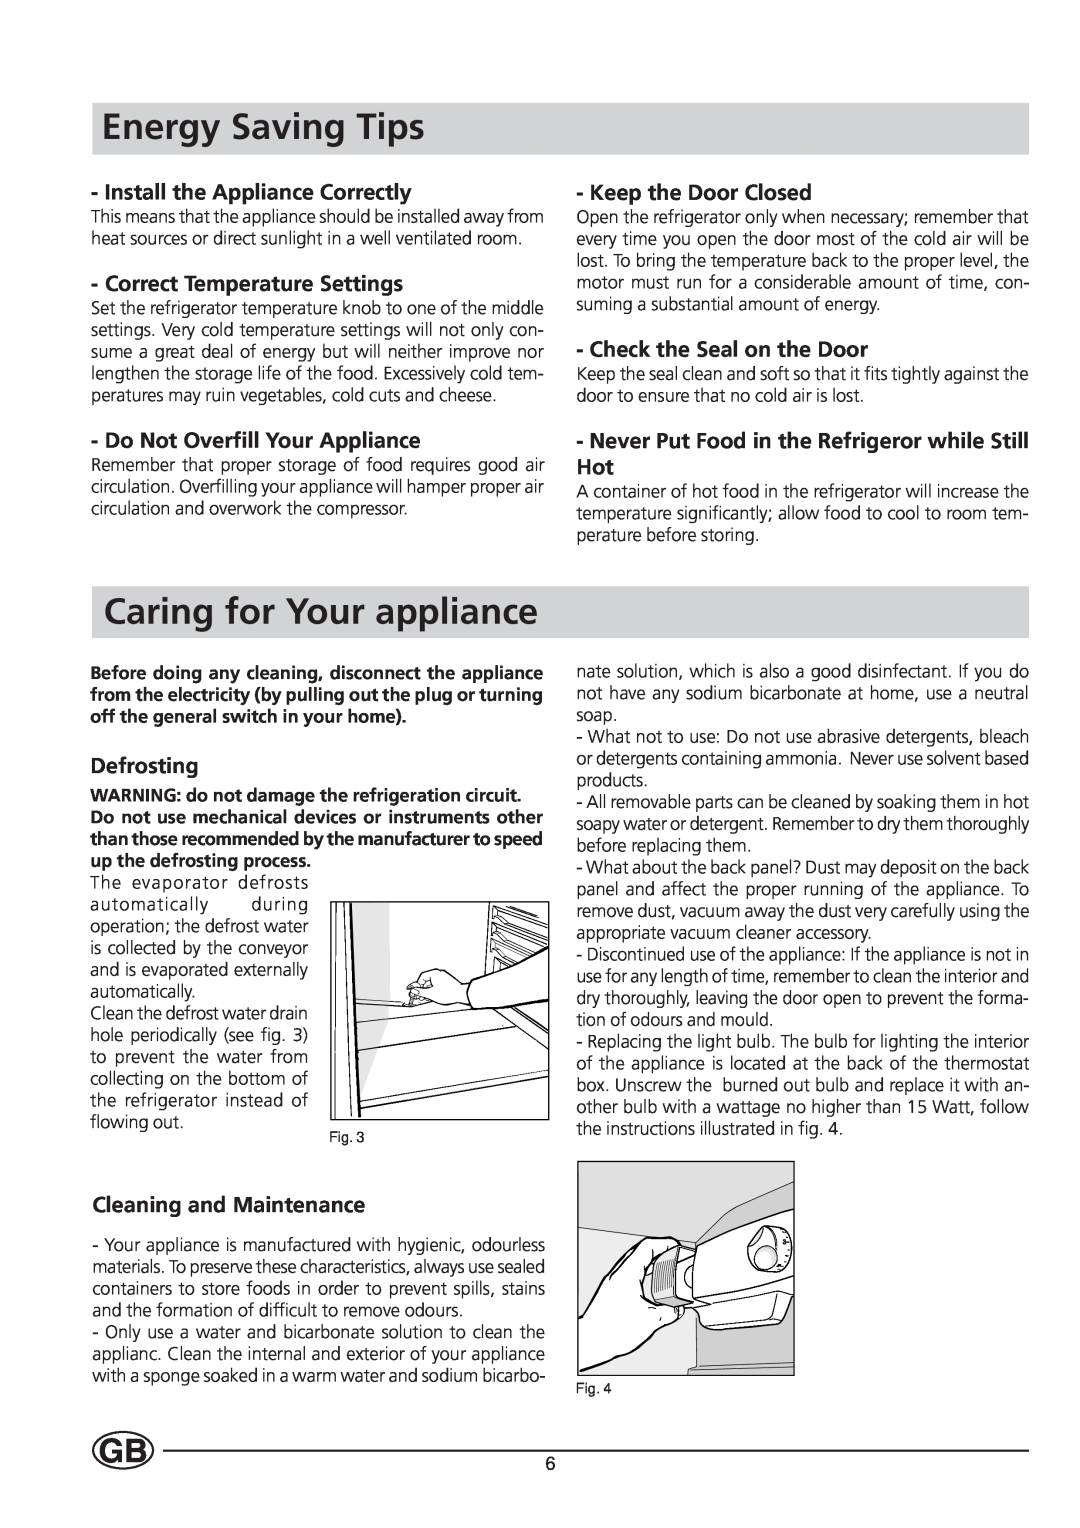 Indesit SA300 I manual Energy Saving Tips, Caring for Your appliance, Install the Appliance Correctly, Keep the Door Closed 